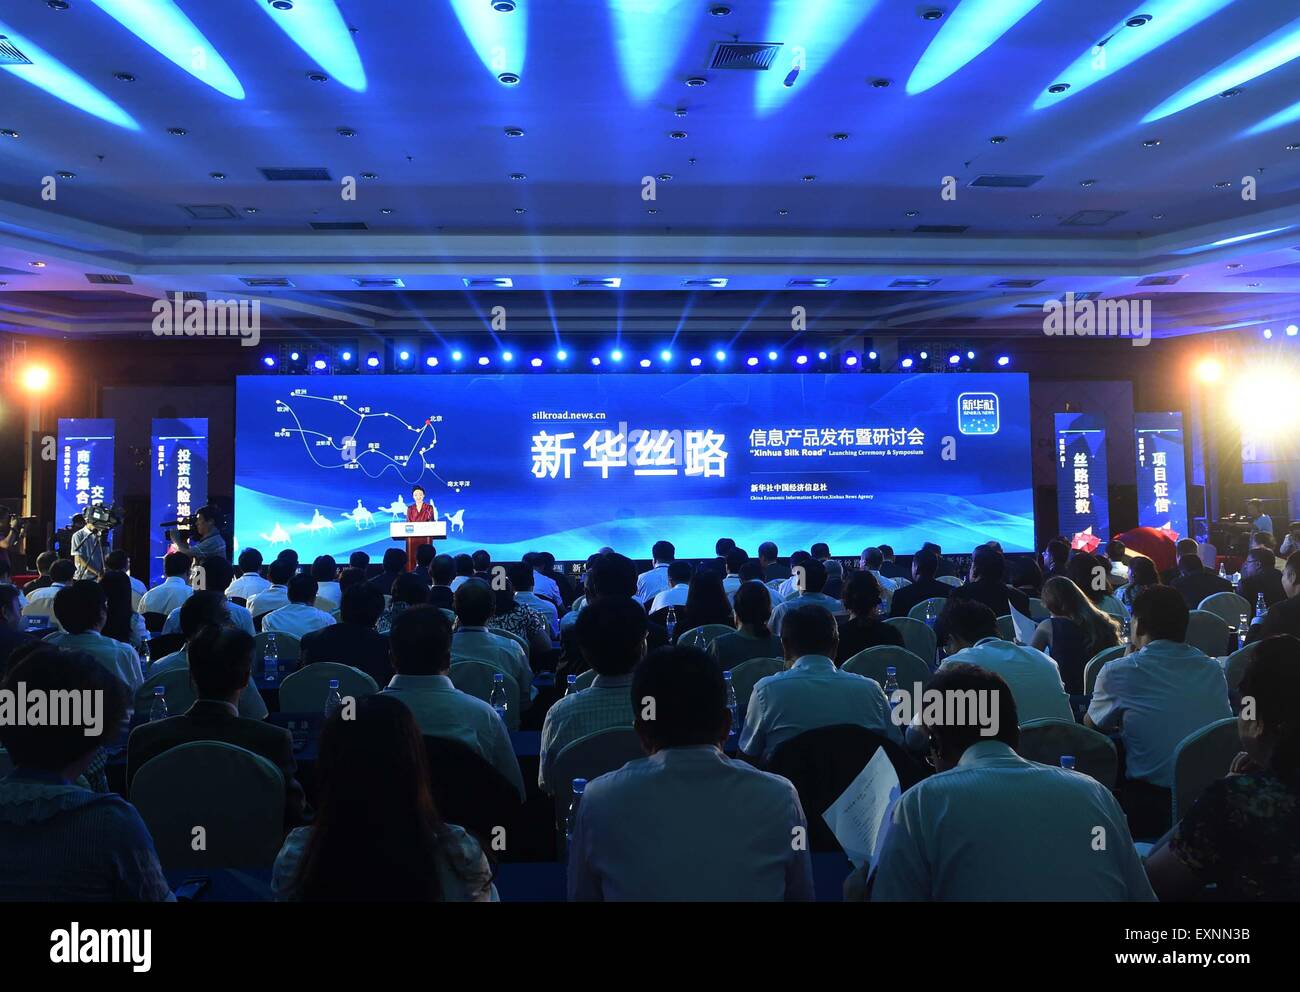 (150716) -- BEIJING, July 16, 2015 (Xinhua) -- The 'Xinhua Silk Road' launching ceremony and symposium is held in Beijing, capital of China, July 16, 2015. Xinhua News Agency, China's largest national news service, began offering new information services focusing on providing economic and financial information for investors in the Belt and Road Initiative on Thursday. The core product of the new service is Xinhua Silk Road, which includes the Silk Road Database, Xinhua Credit Reports, Consulting & Thinktank Services and an interactive and business match-making Xinhua Silk Road IM System. (Xinh Stock Photo